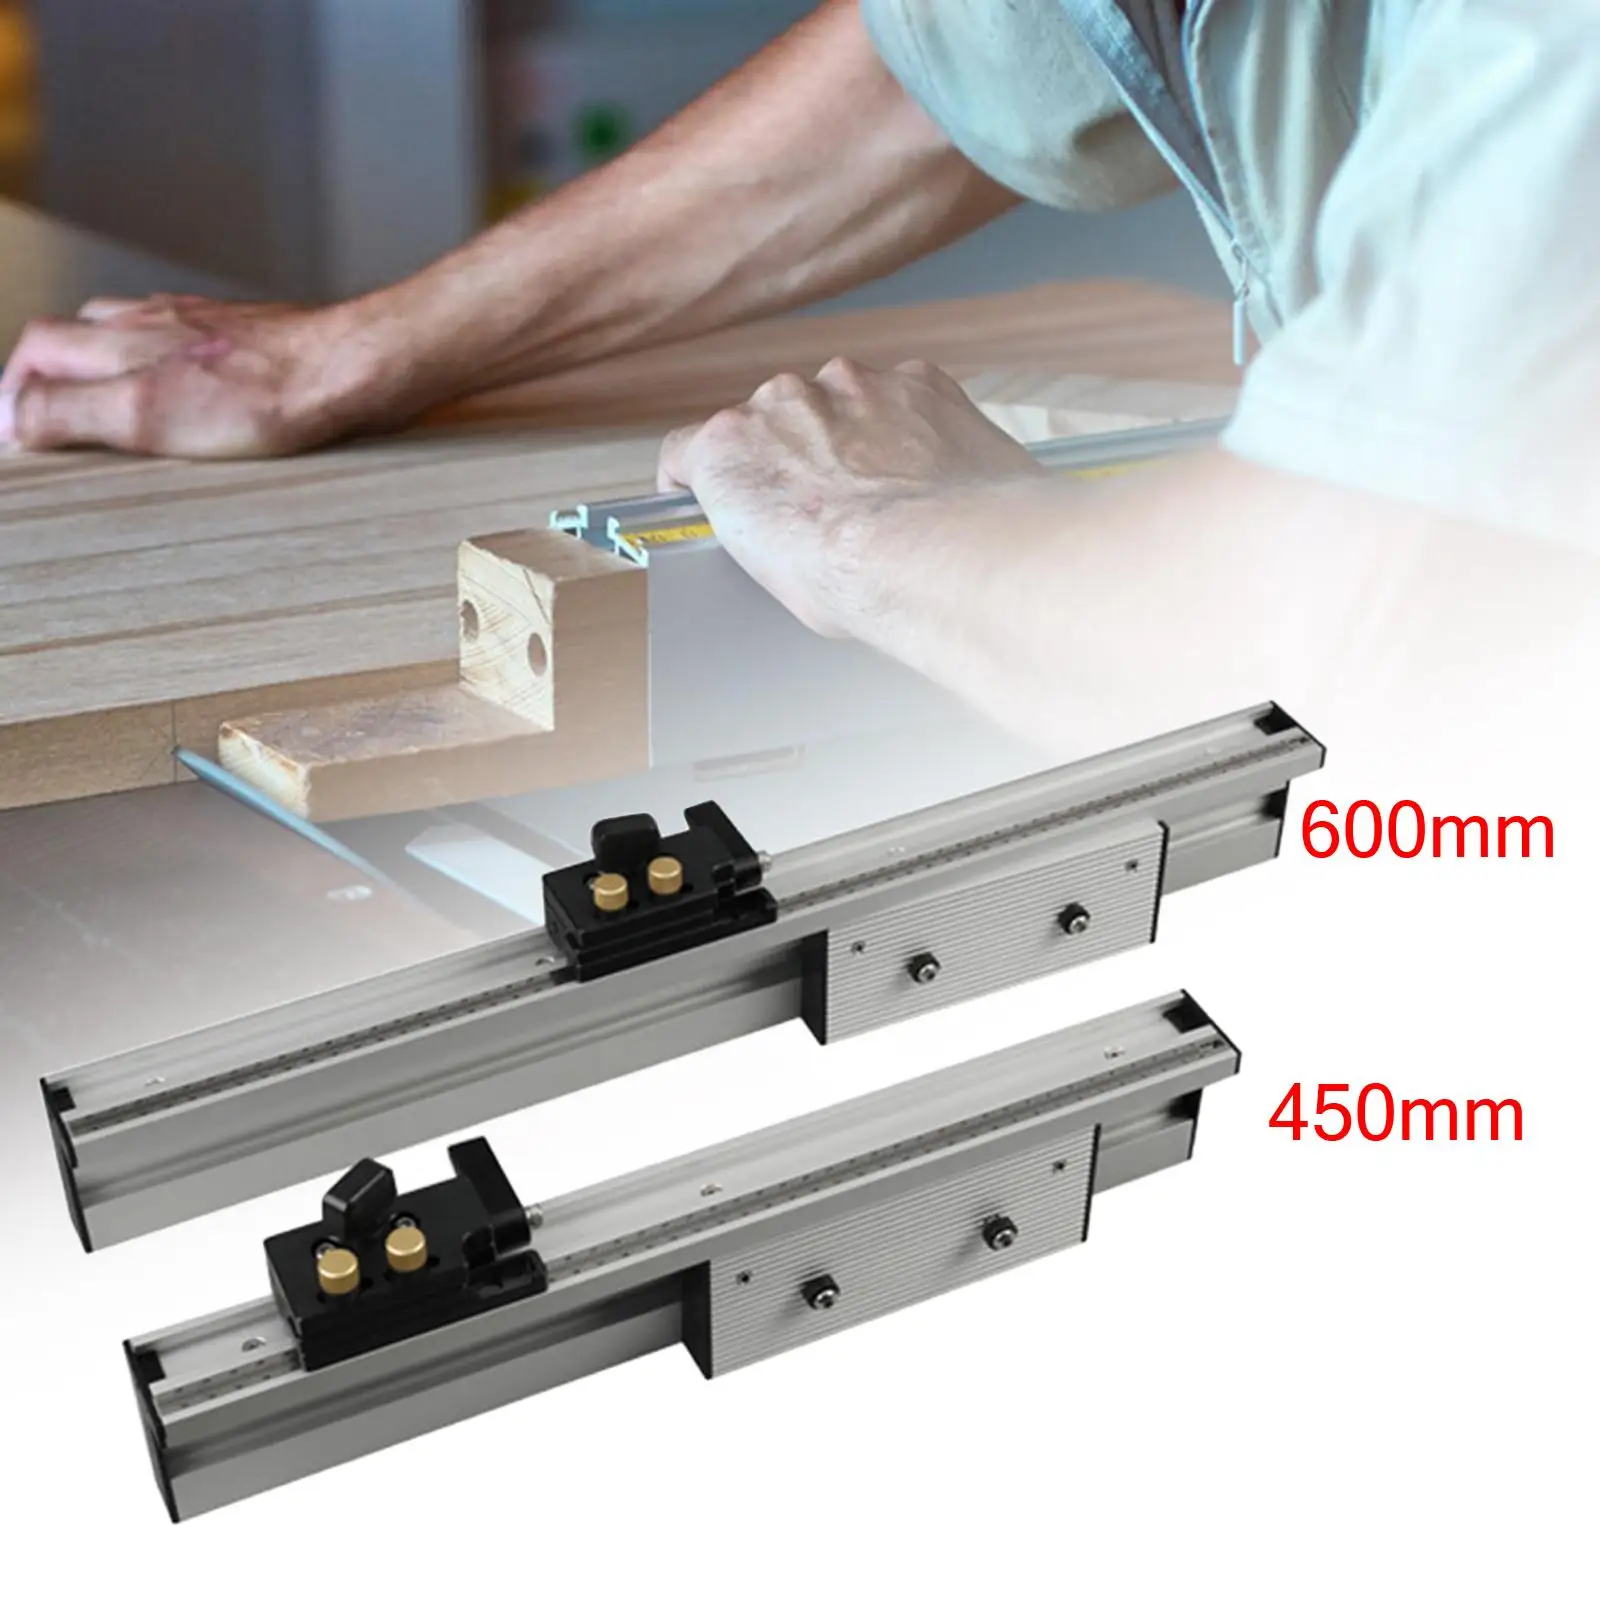 Aluminum T Tracks Slot Woodworking Benches Table Accurate Miter Track with Miter Gauge Aluminium Profile Fence Sliding Brackets